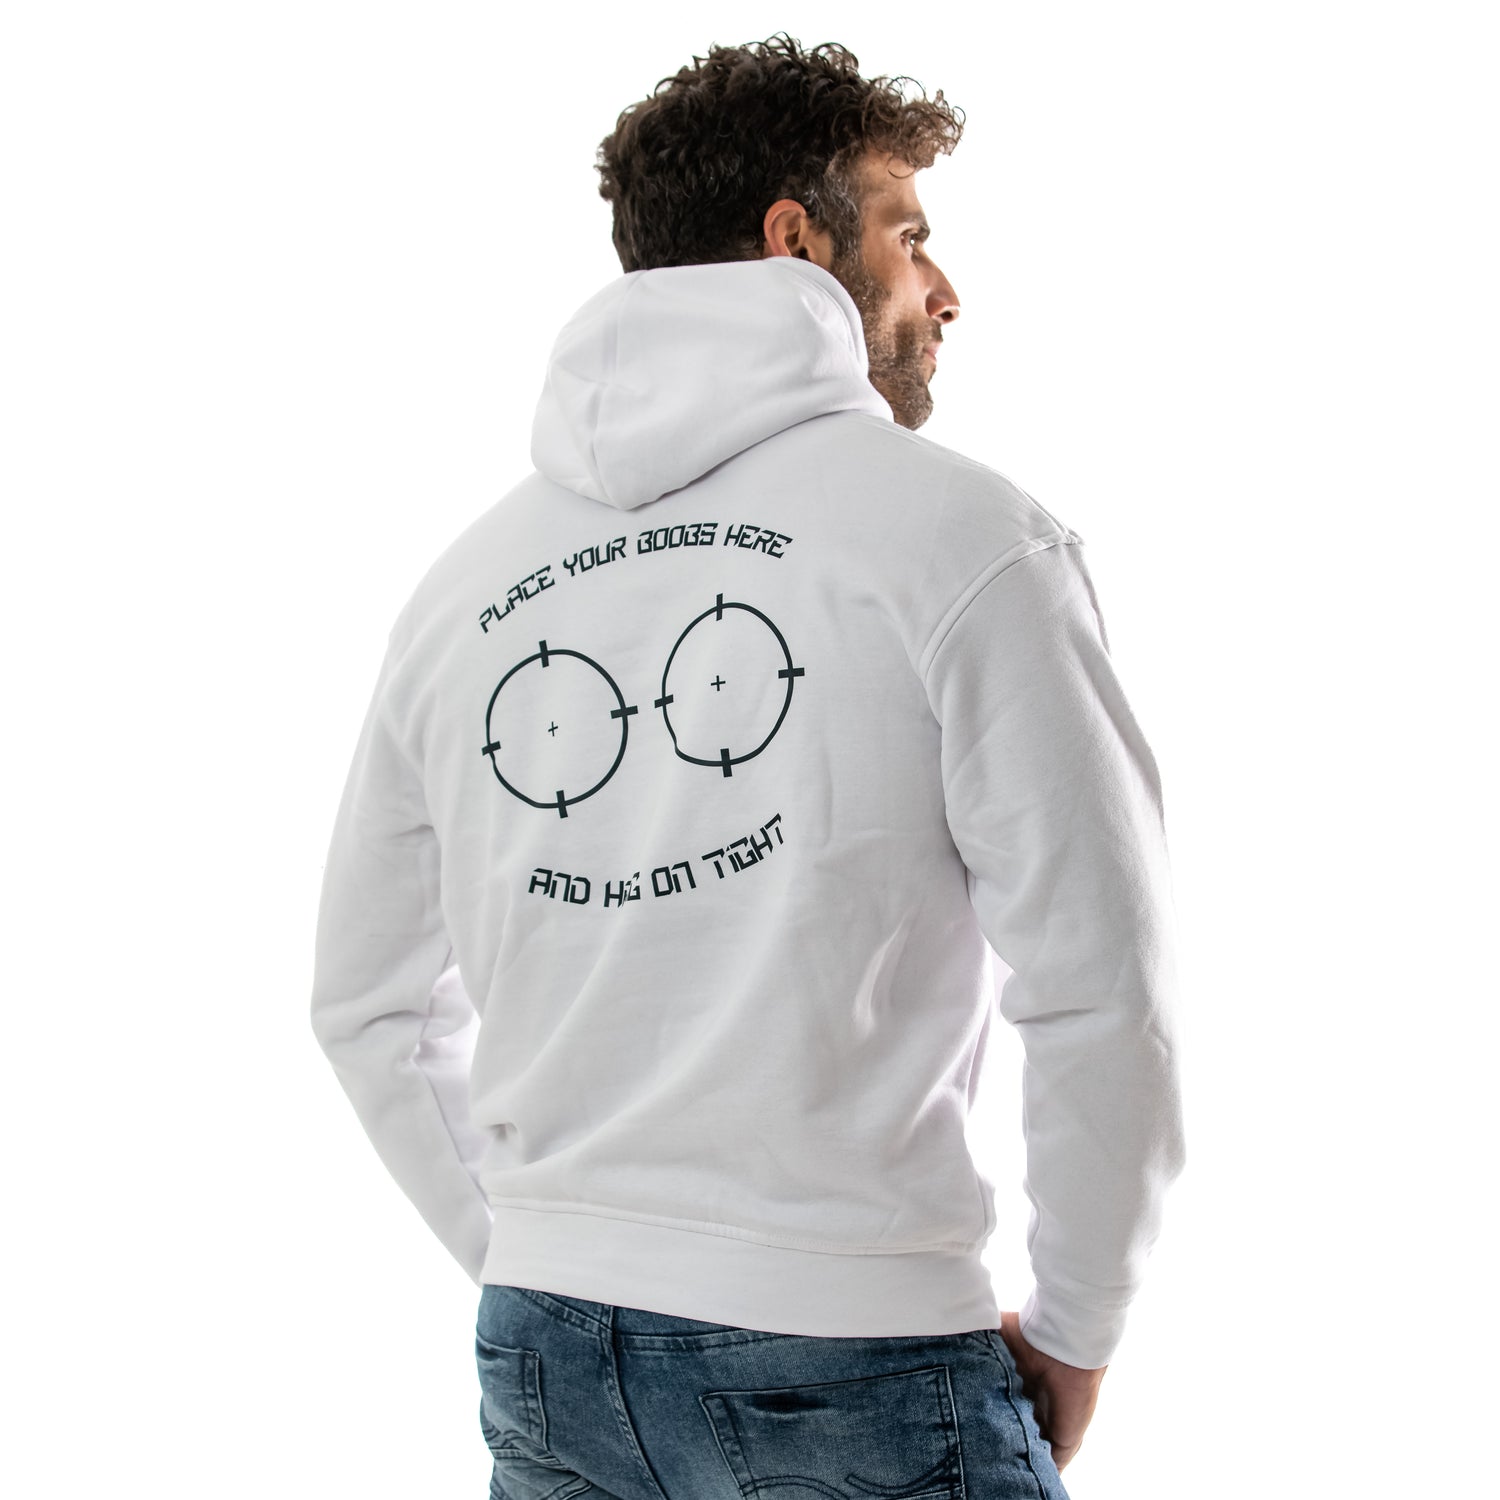 Place Your Boobs Here And Hang On Tight Hoodie, hoodie, sweater